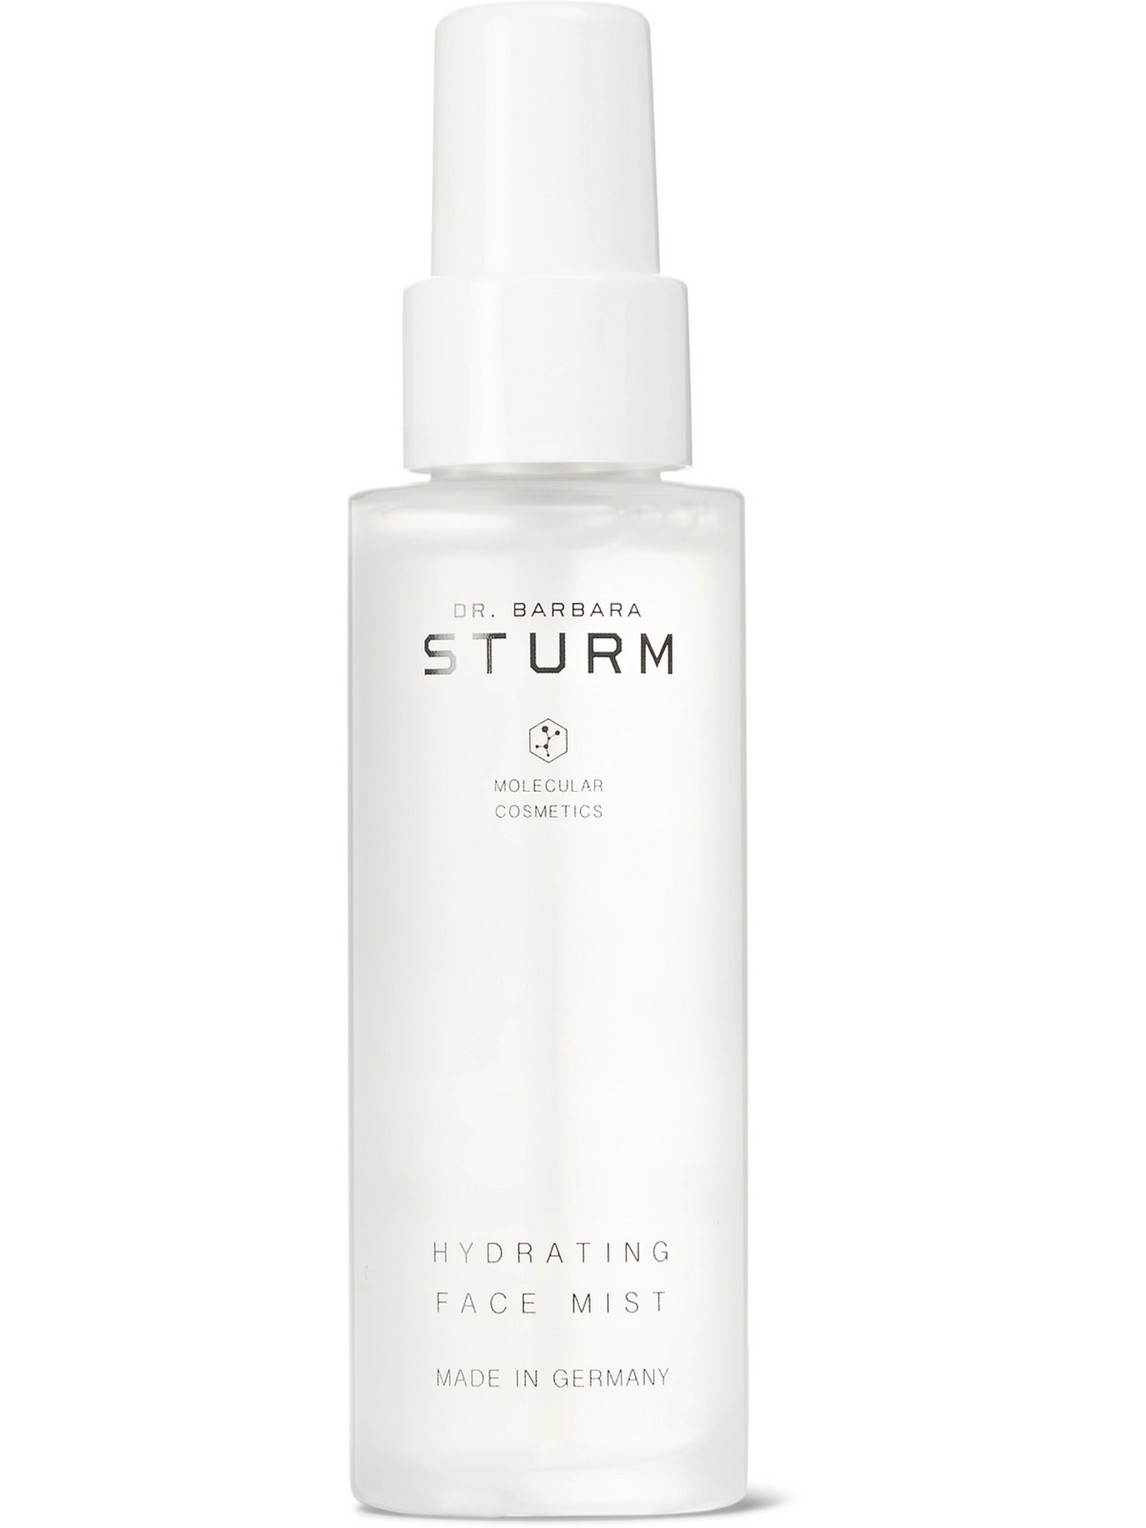 Dr. Barbara Sturm Hydrating Face Mist, 50ml In Colorless